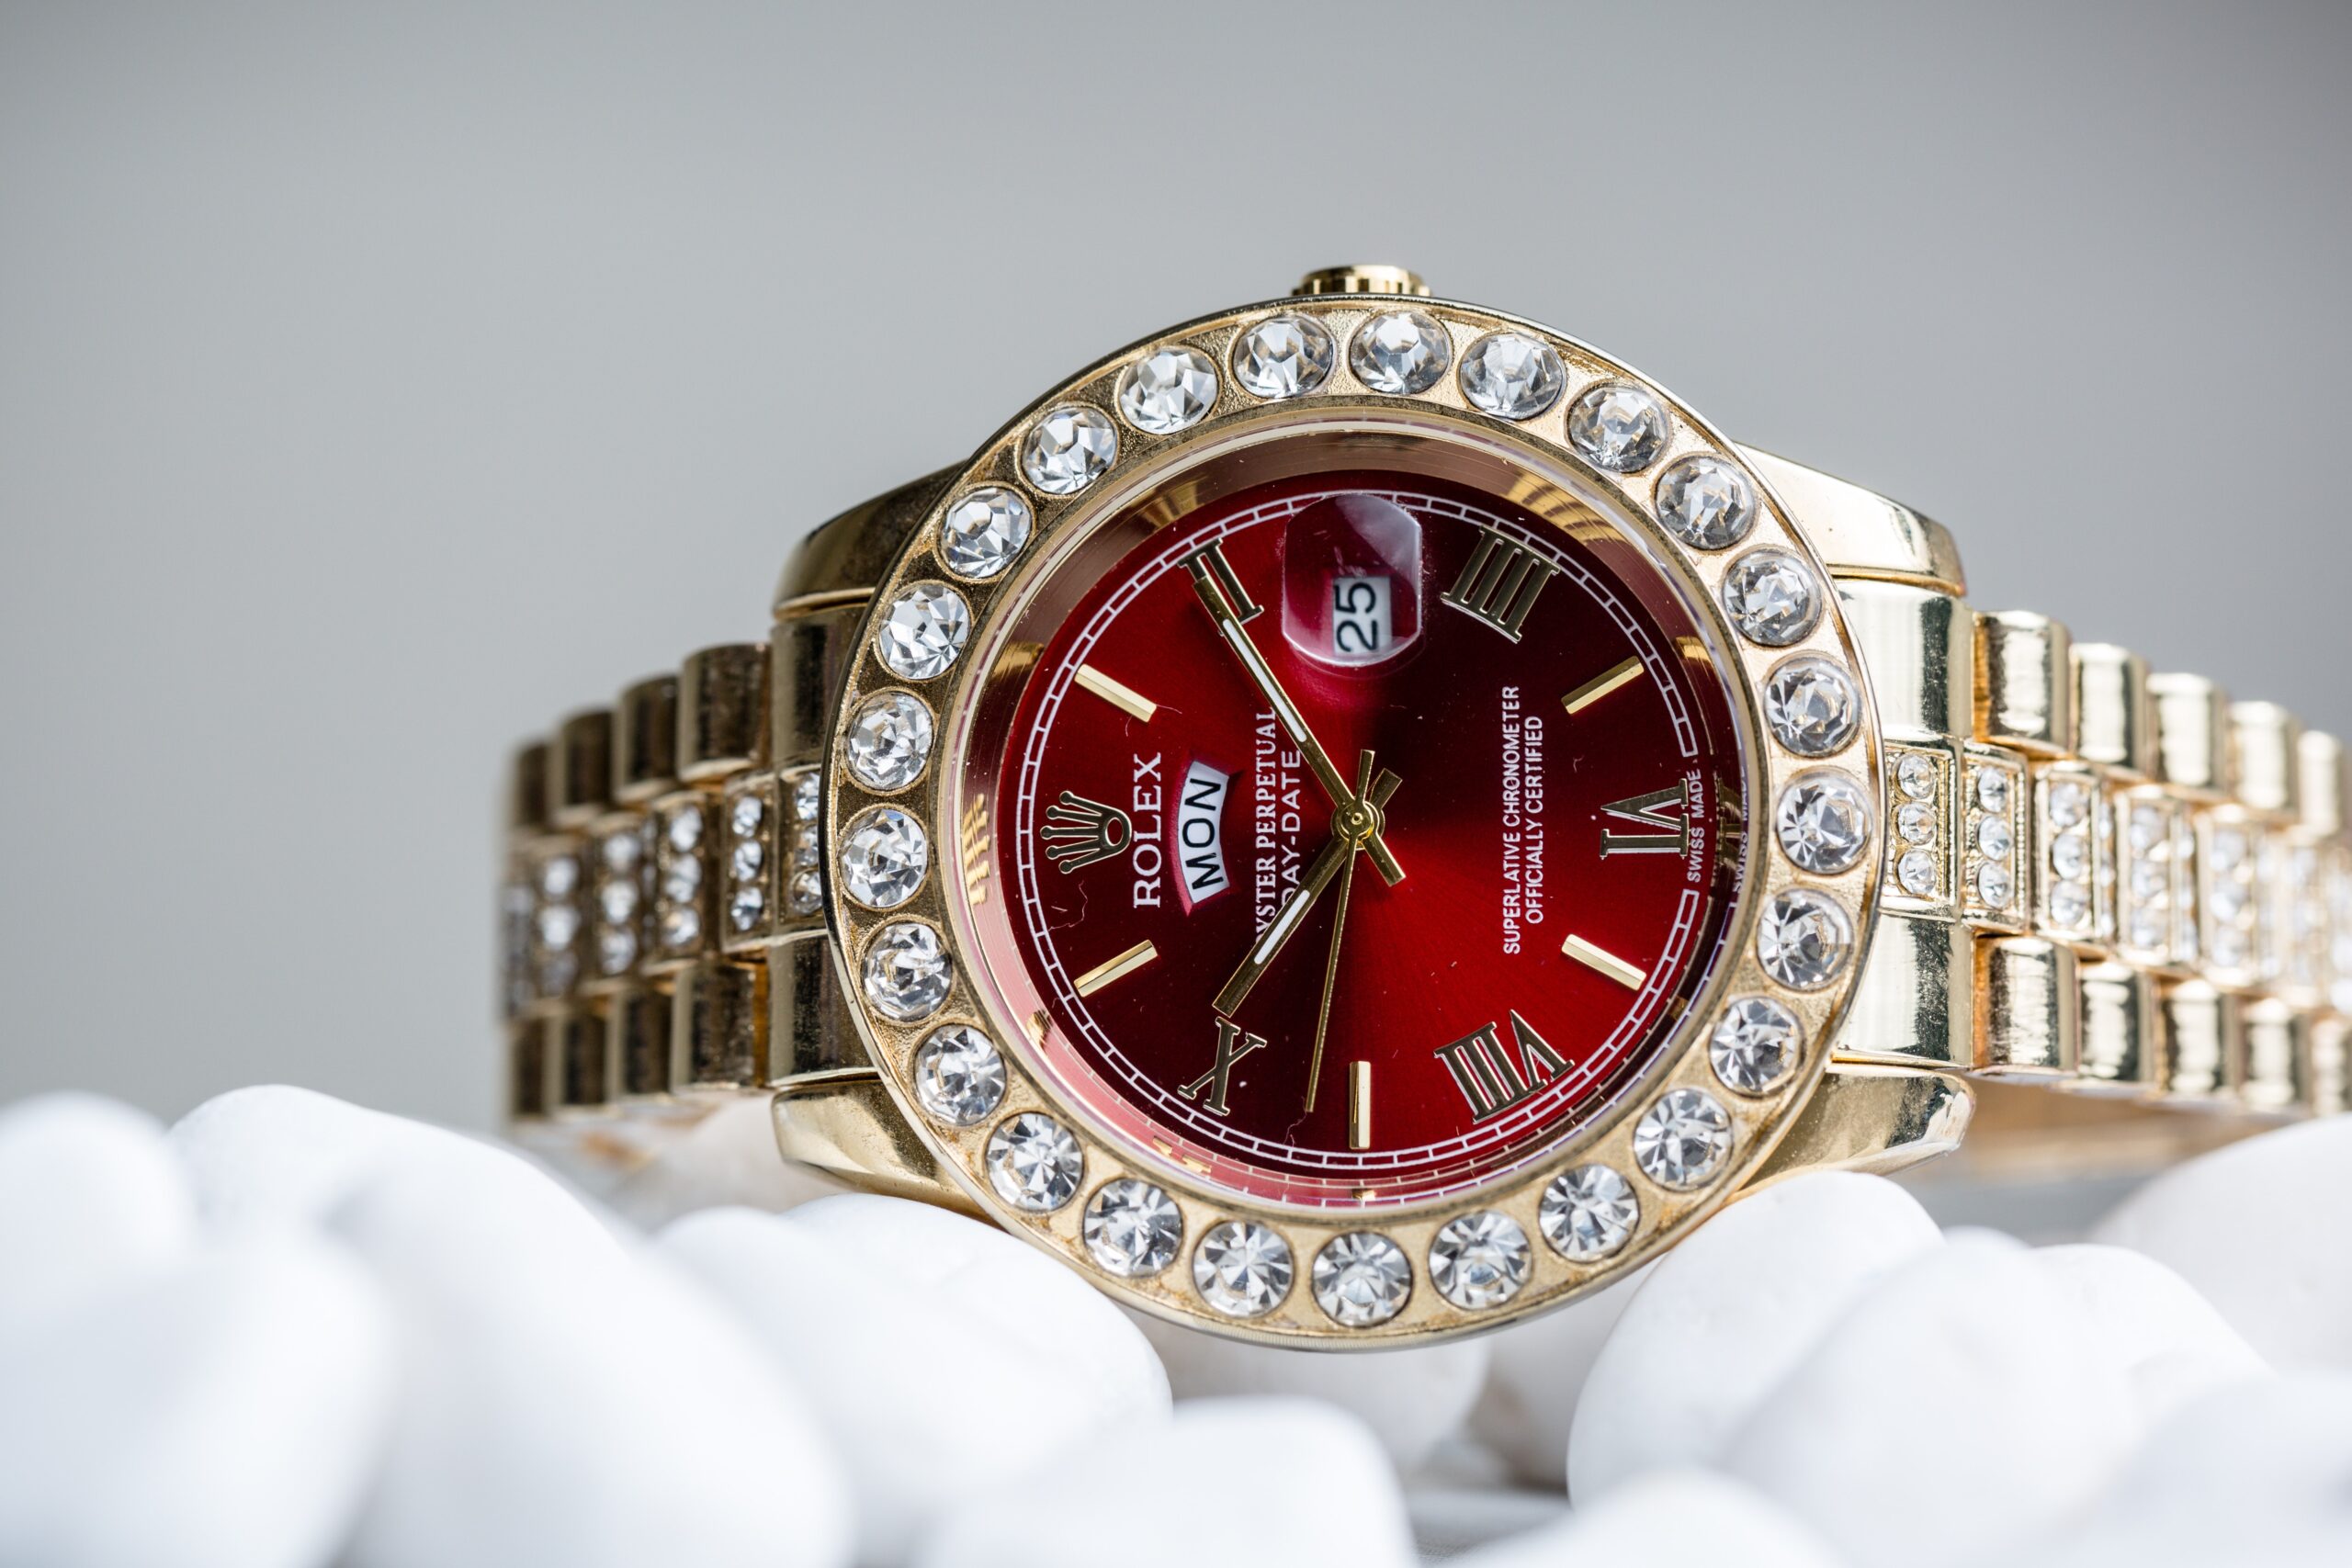 The Rolex Women’s Watch: Things You Need to Know